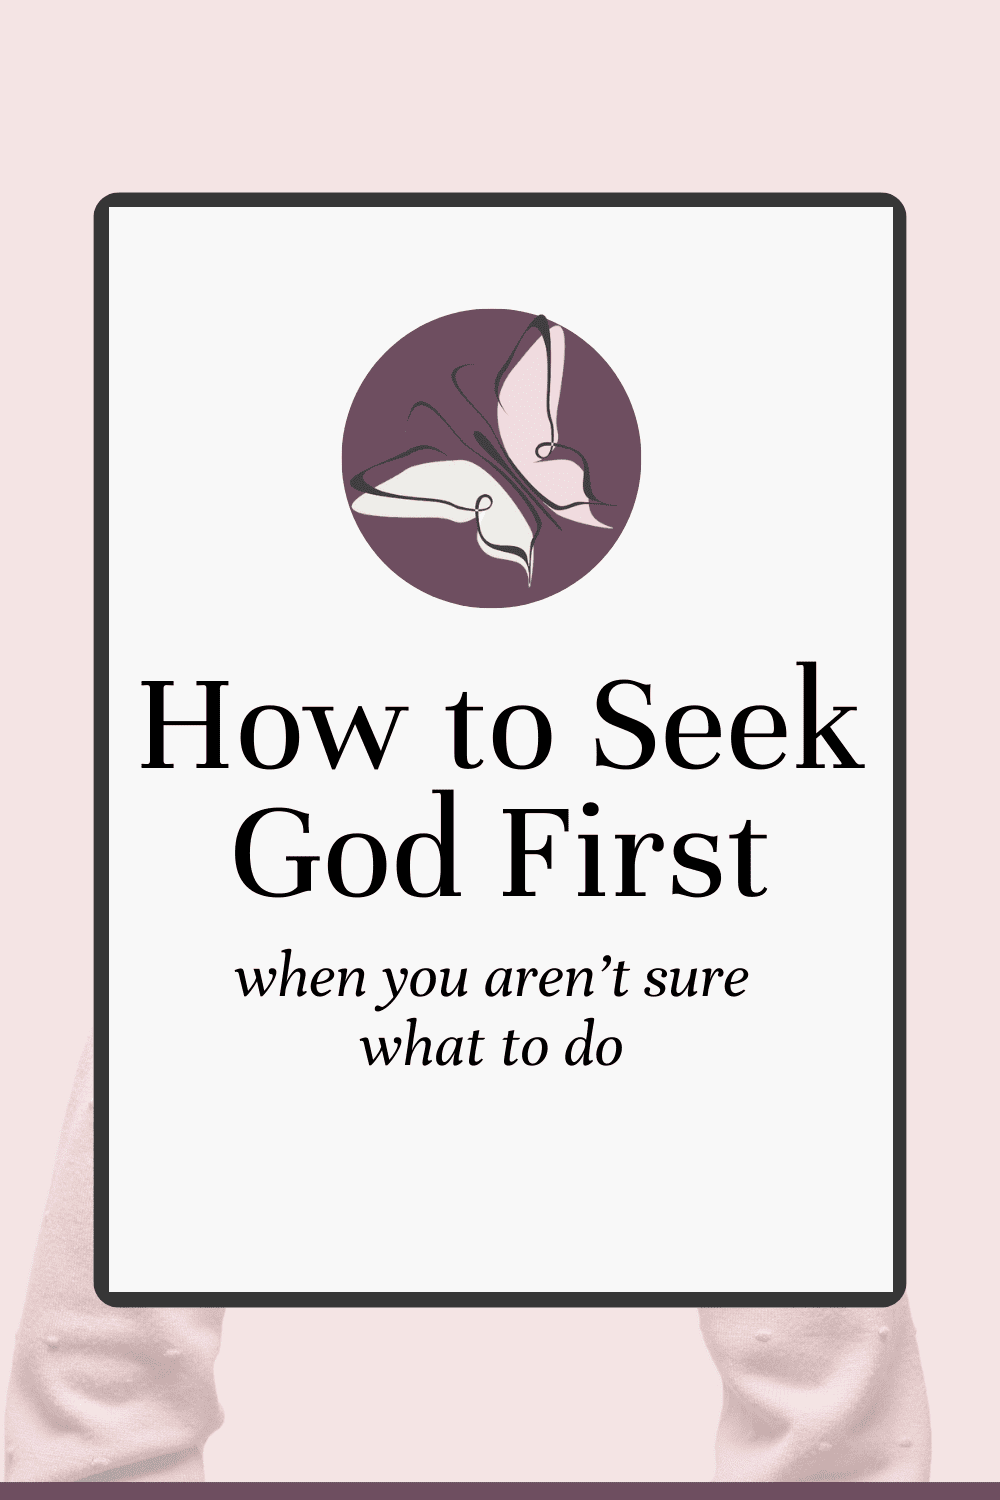 Learning how to seek God first is important for the Christian life. Being able to put God first will help you during hard times when you need guidance and direction. Here's a look into how you should live your life as a follower of Jesus.